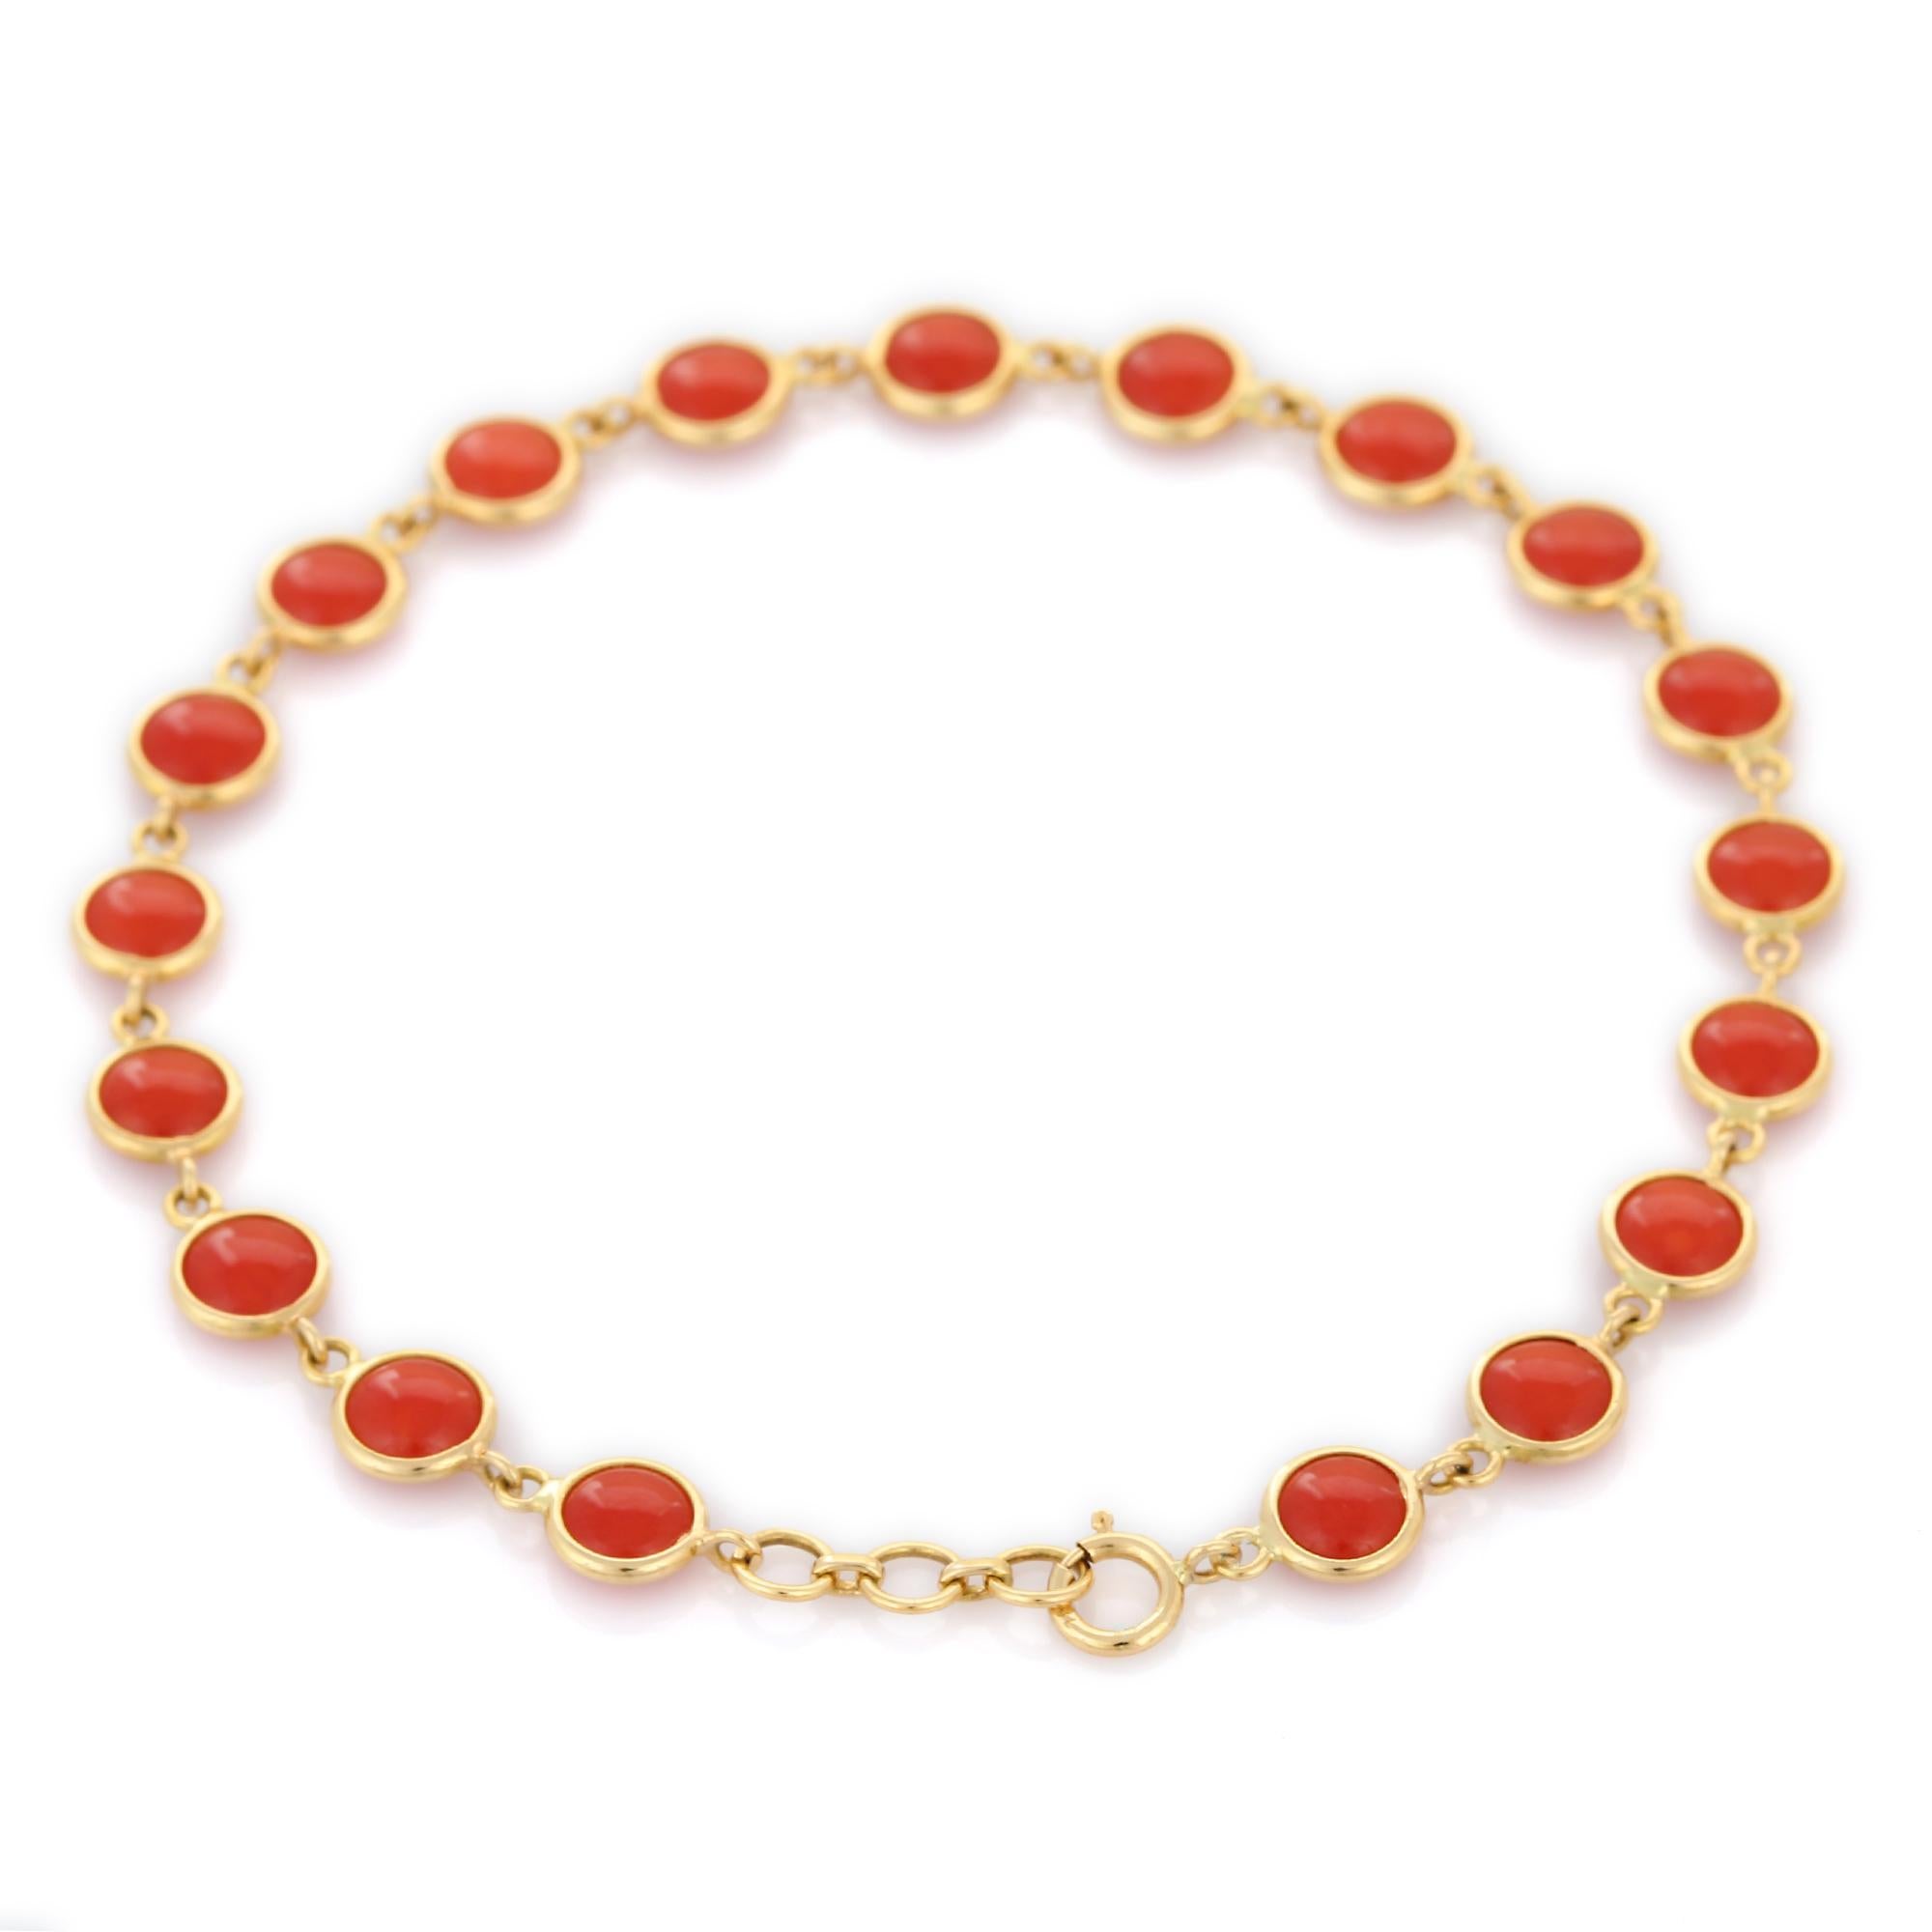 Women's 8.2 ct Round Cut Coral Station Chain Bracelet Studded in 18K Yellow Gold For Sale